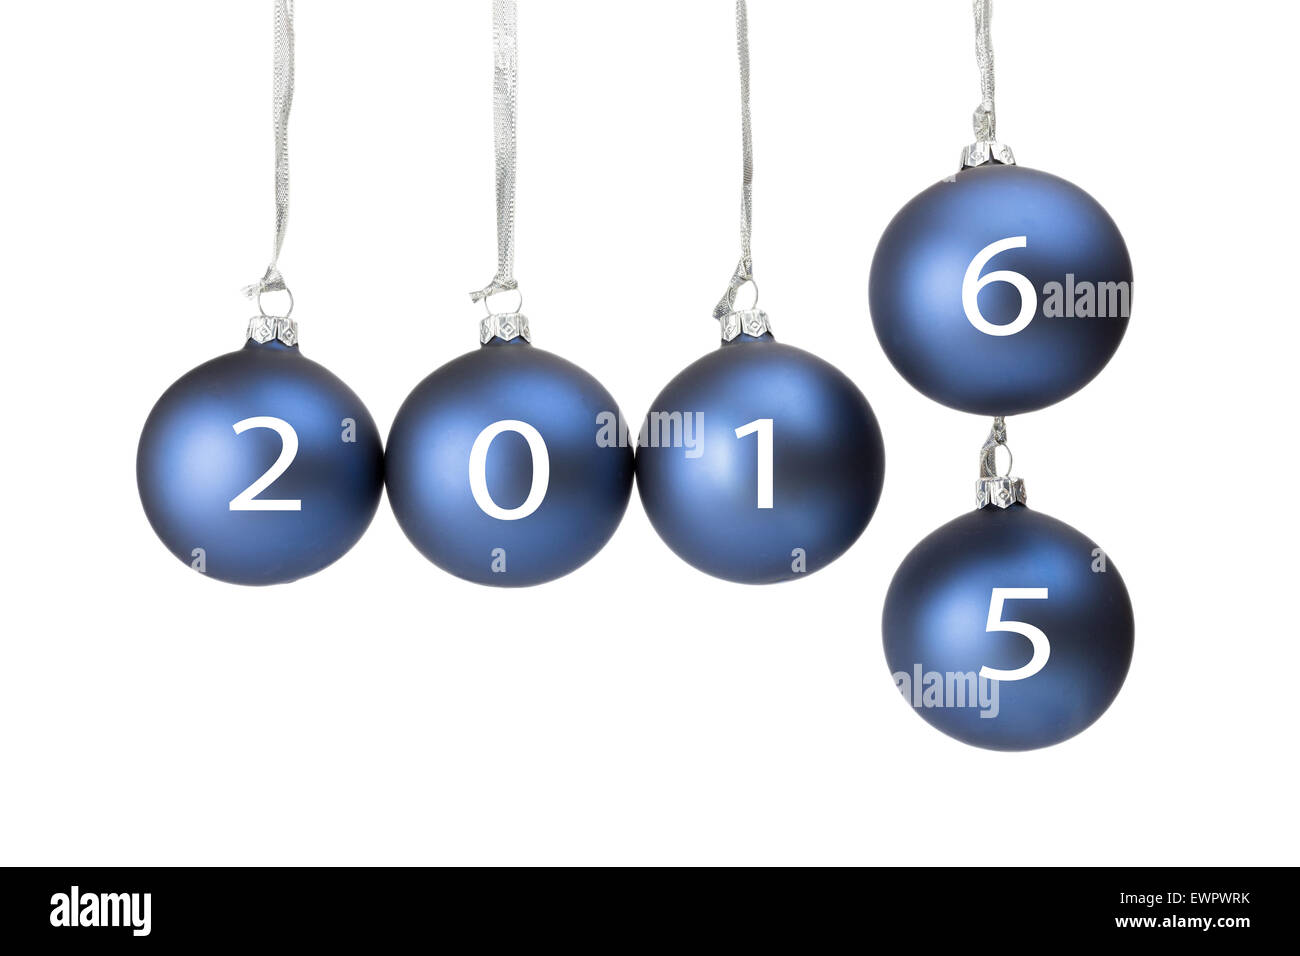 Five blue christmas balls or baubles symbolizing old and new year 2016 isolated on white background Stock Photo